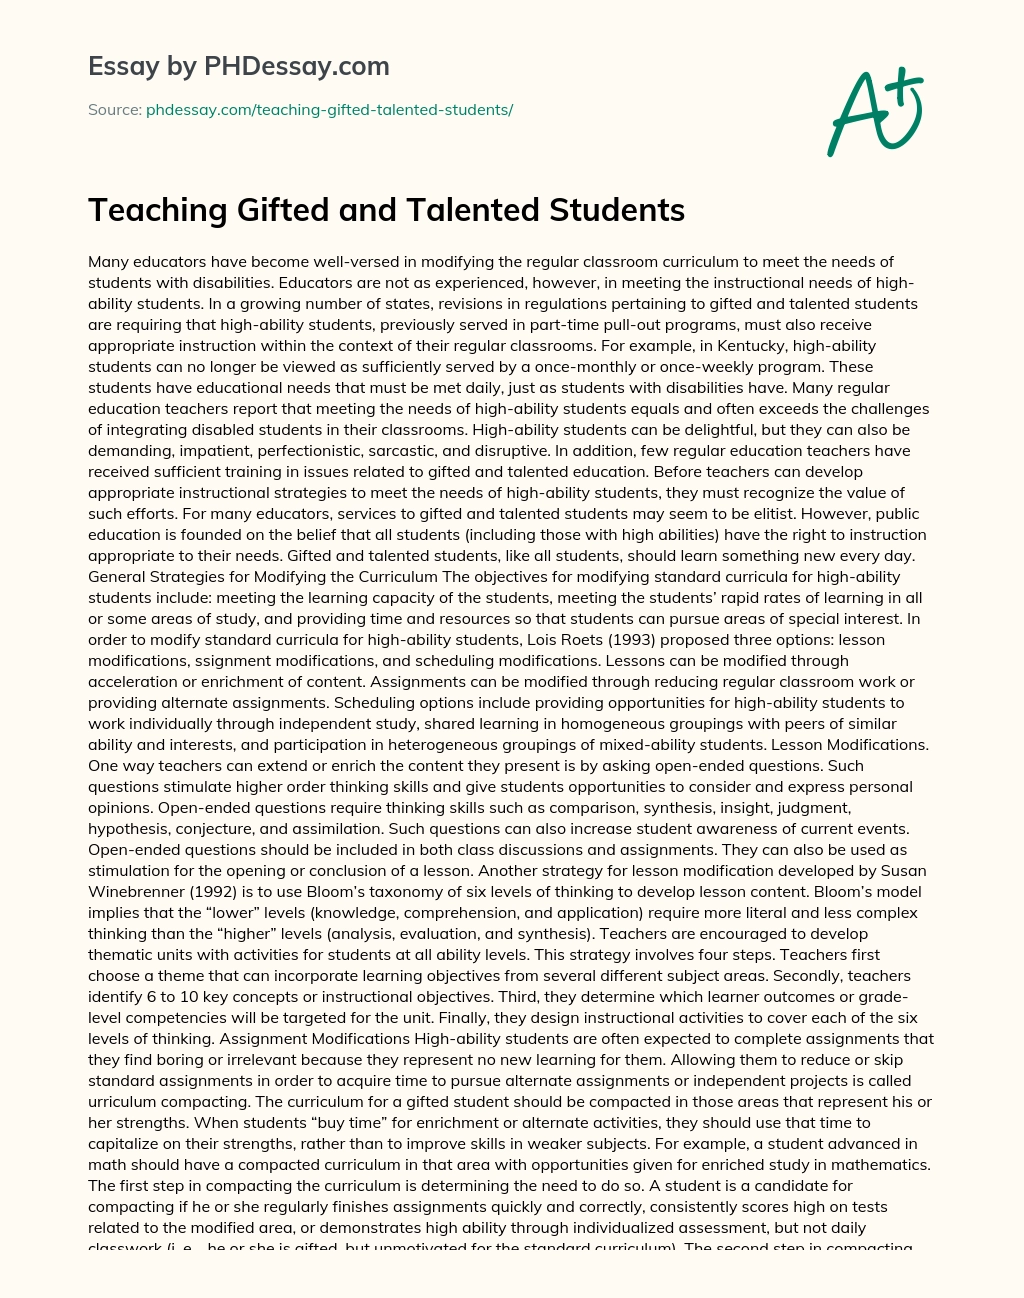 Teaching Gifted and Talented Students essay